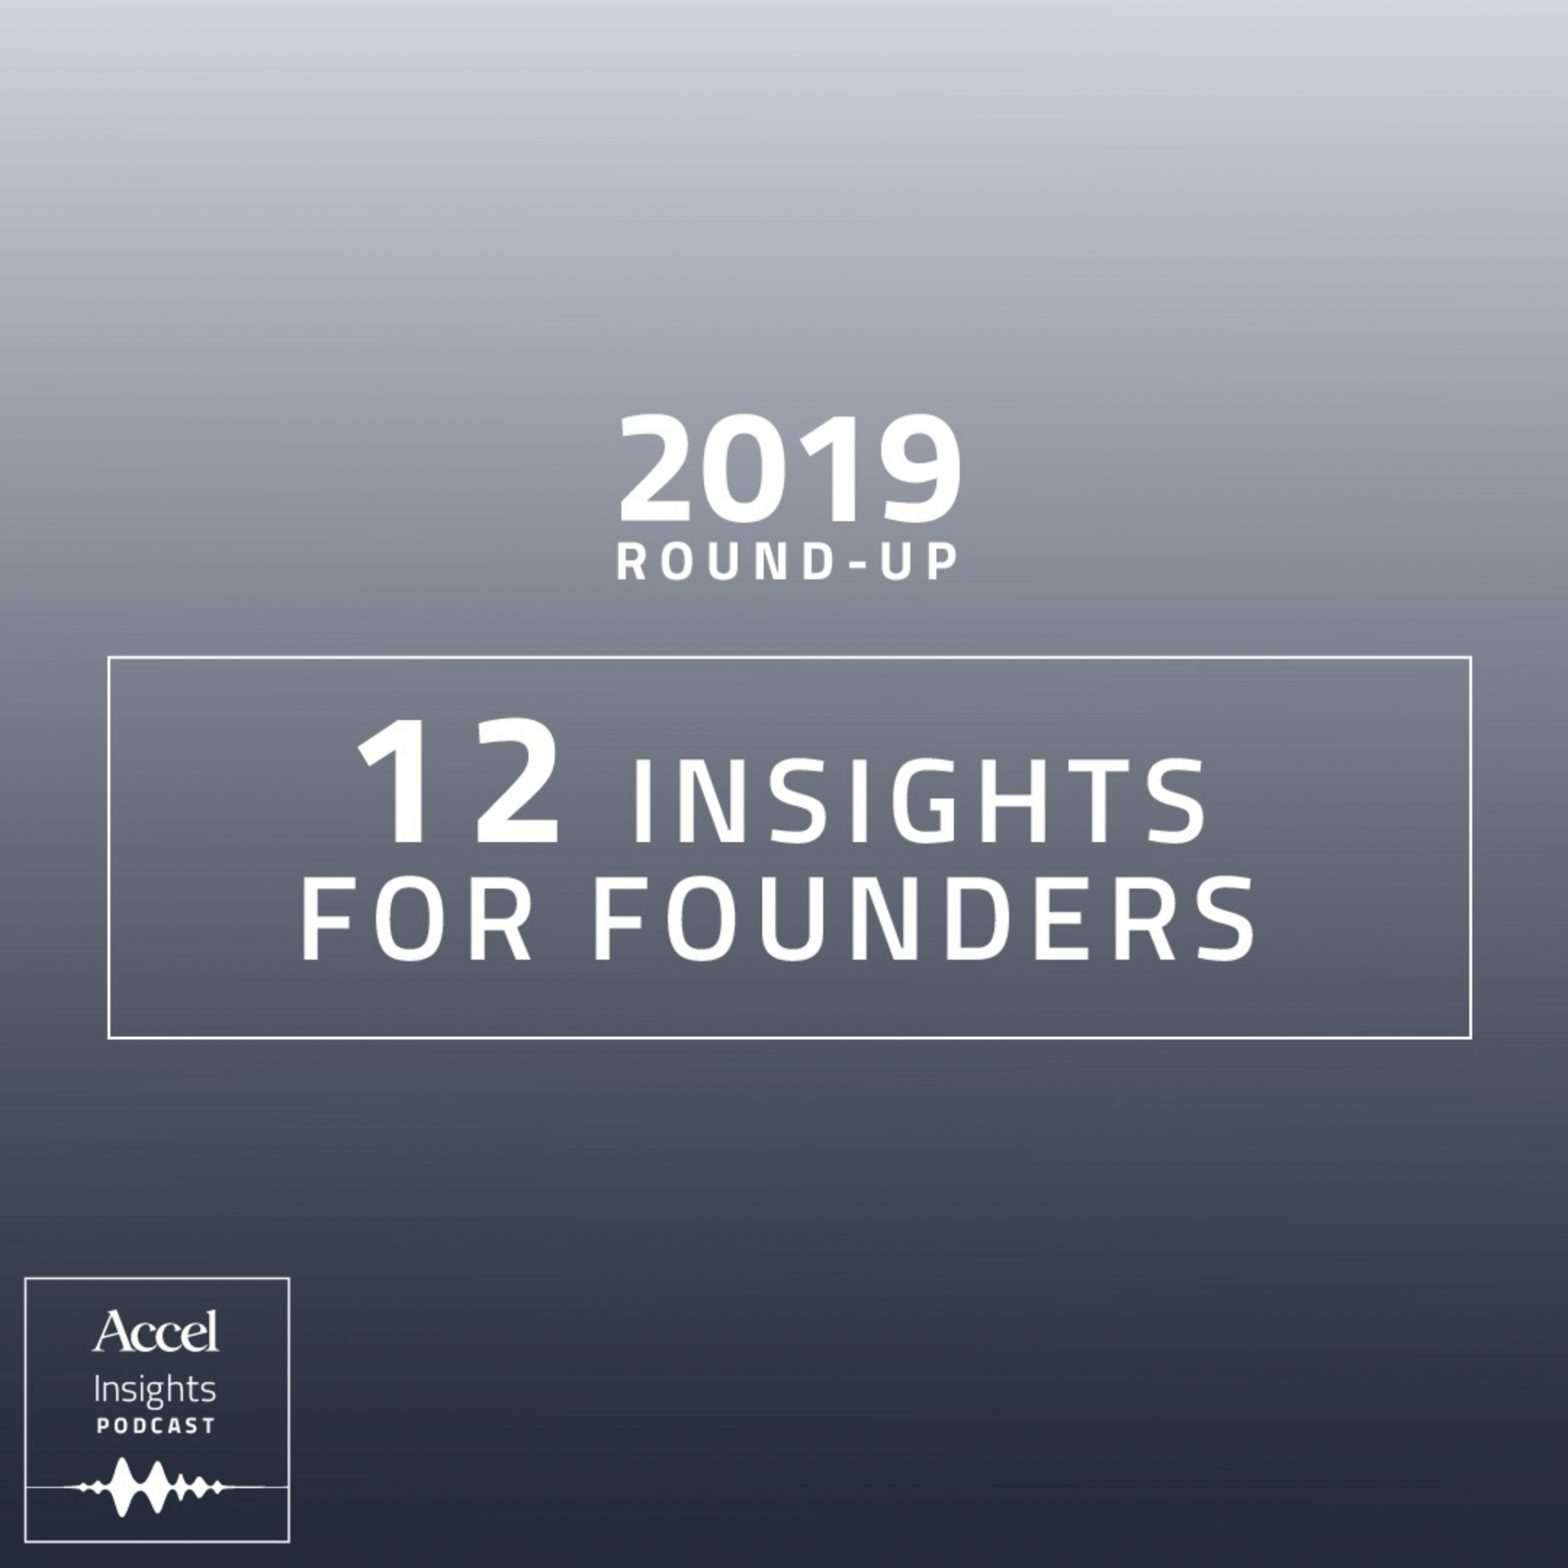 INSIGHTS #45 – 2019 Roundup – 12 Insights for Founders